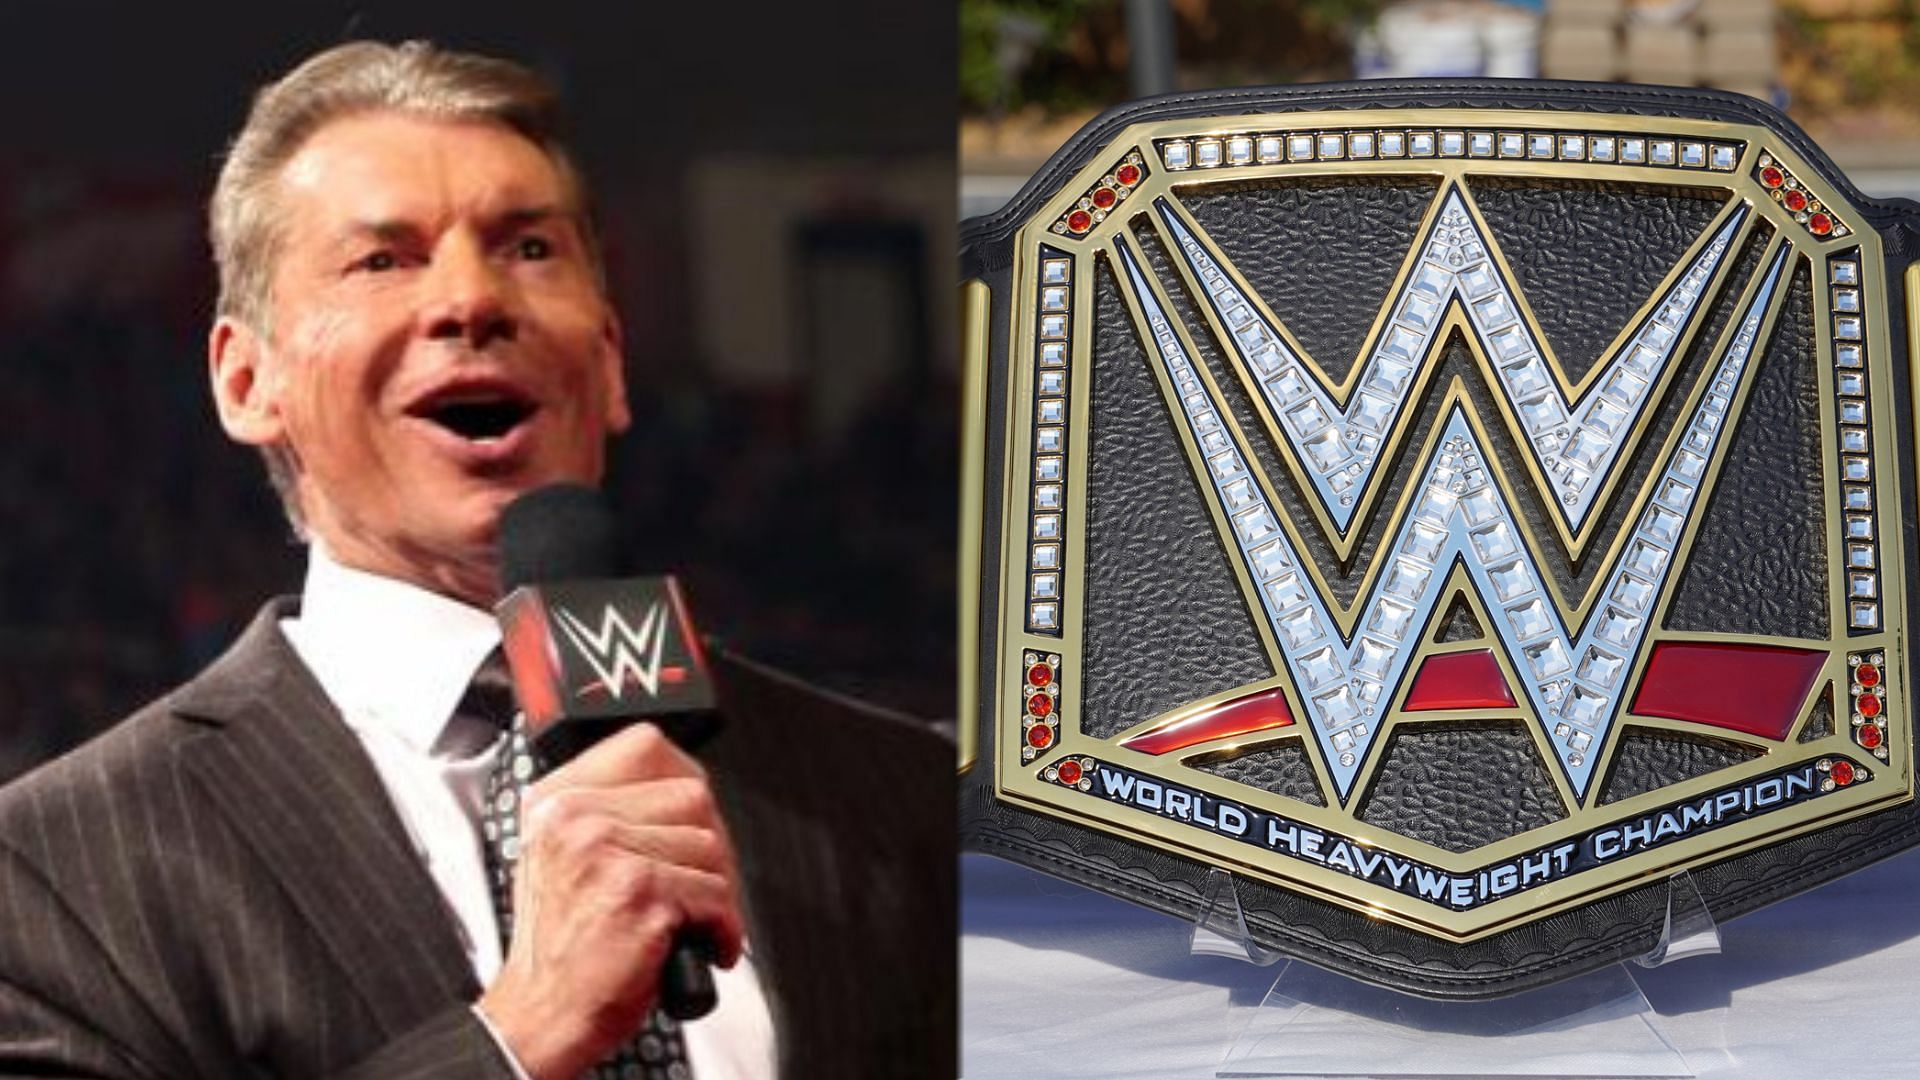 Vince McMahon (Left), The WWE Championship (Right).